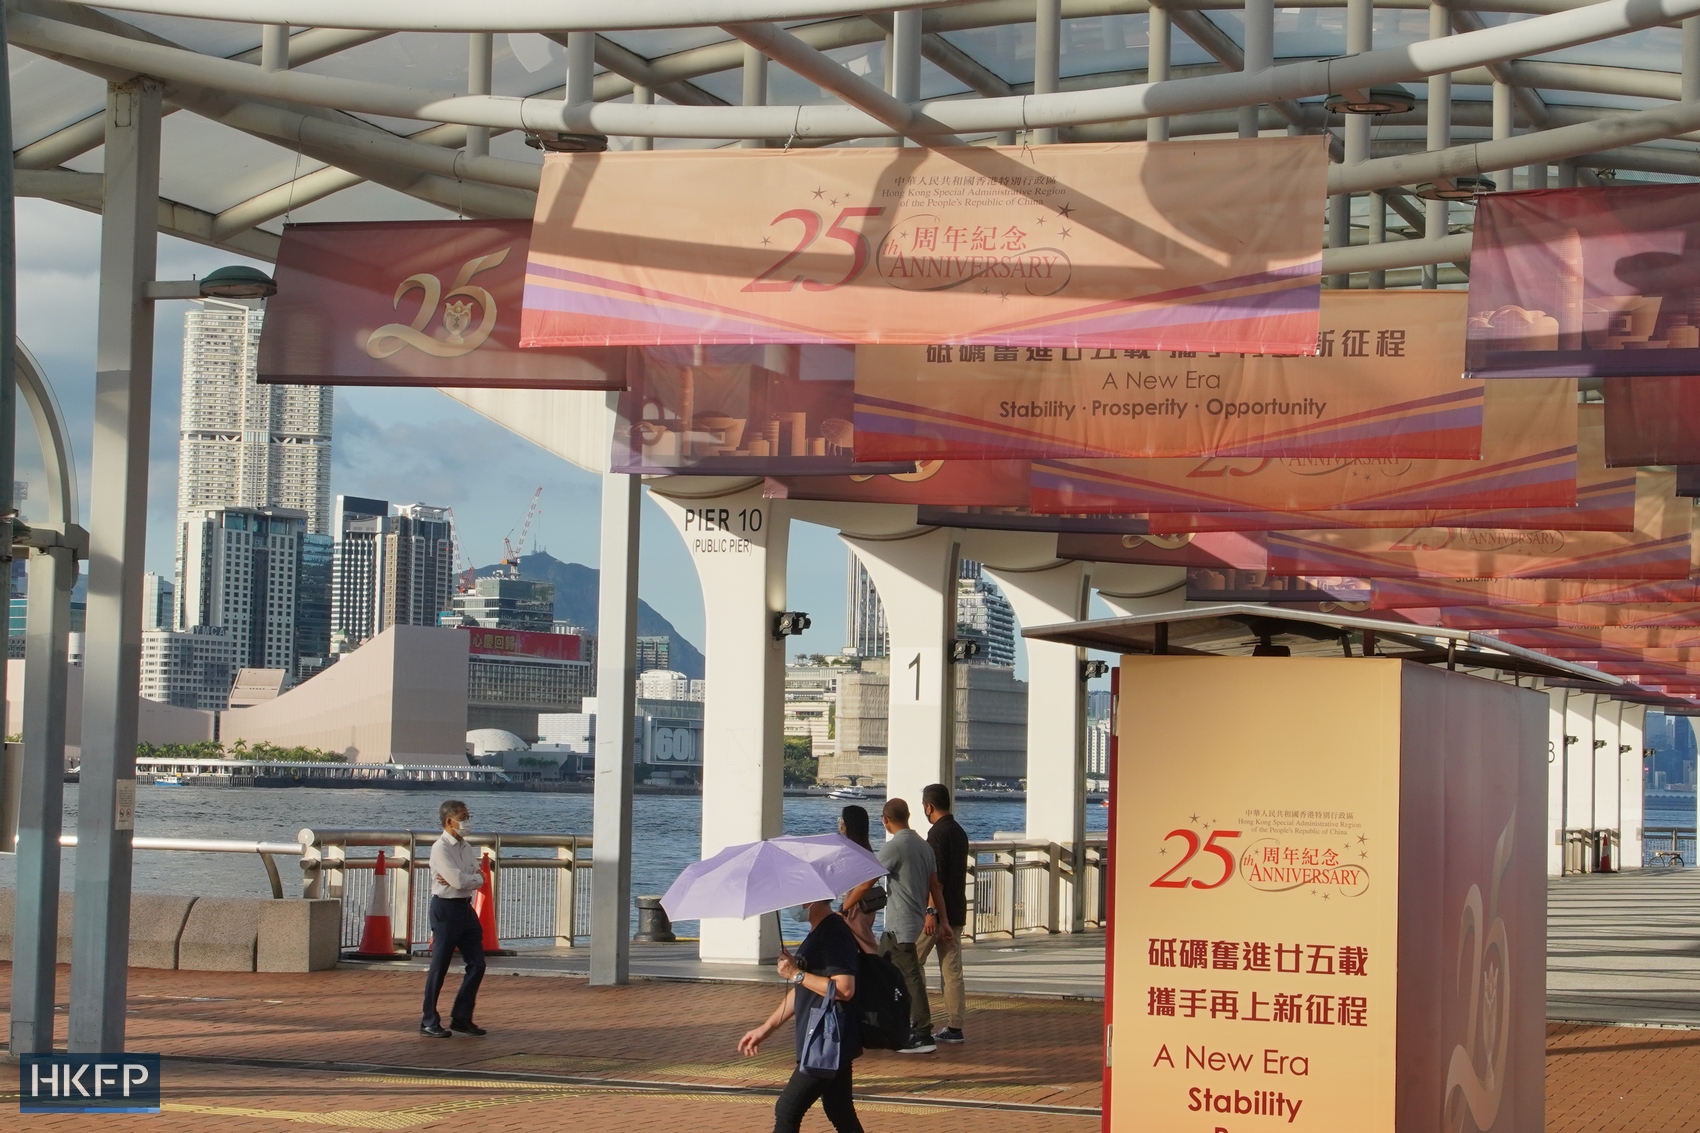 25th Handover anniversary banners central pier